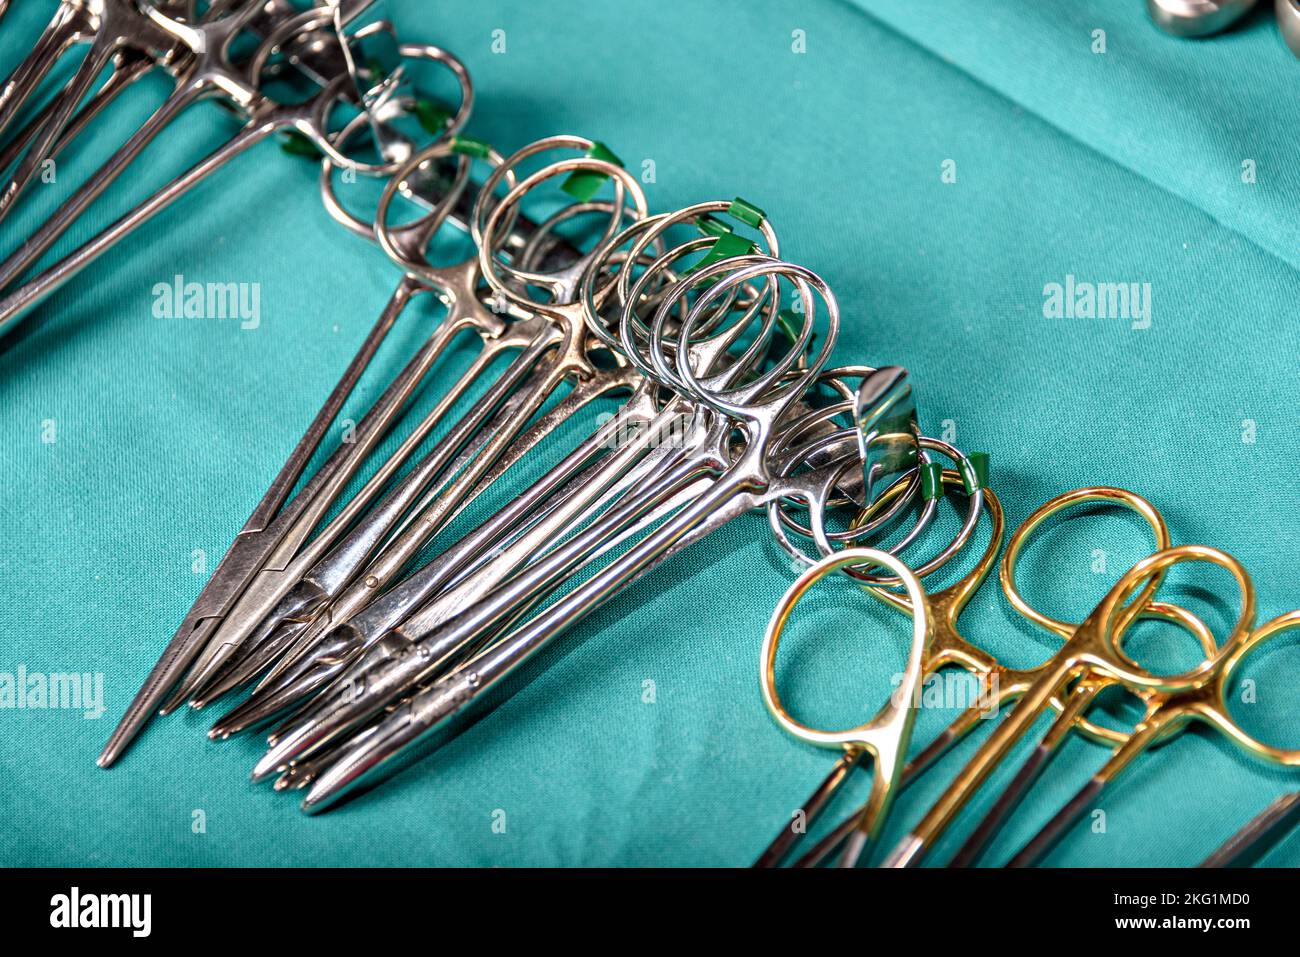 Surgical instruments in the operating room. Stock Photo